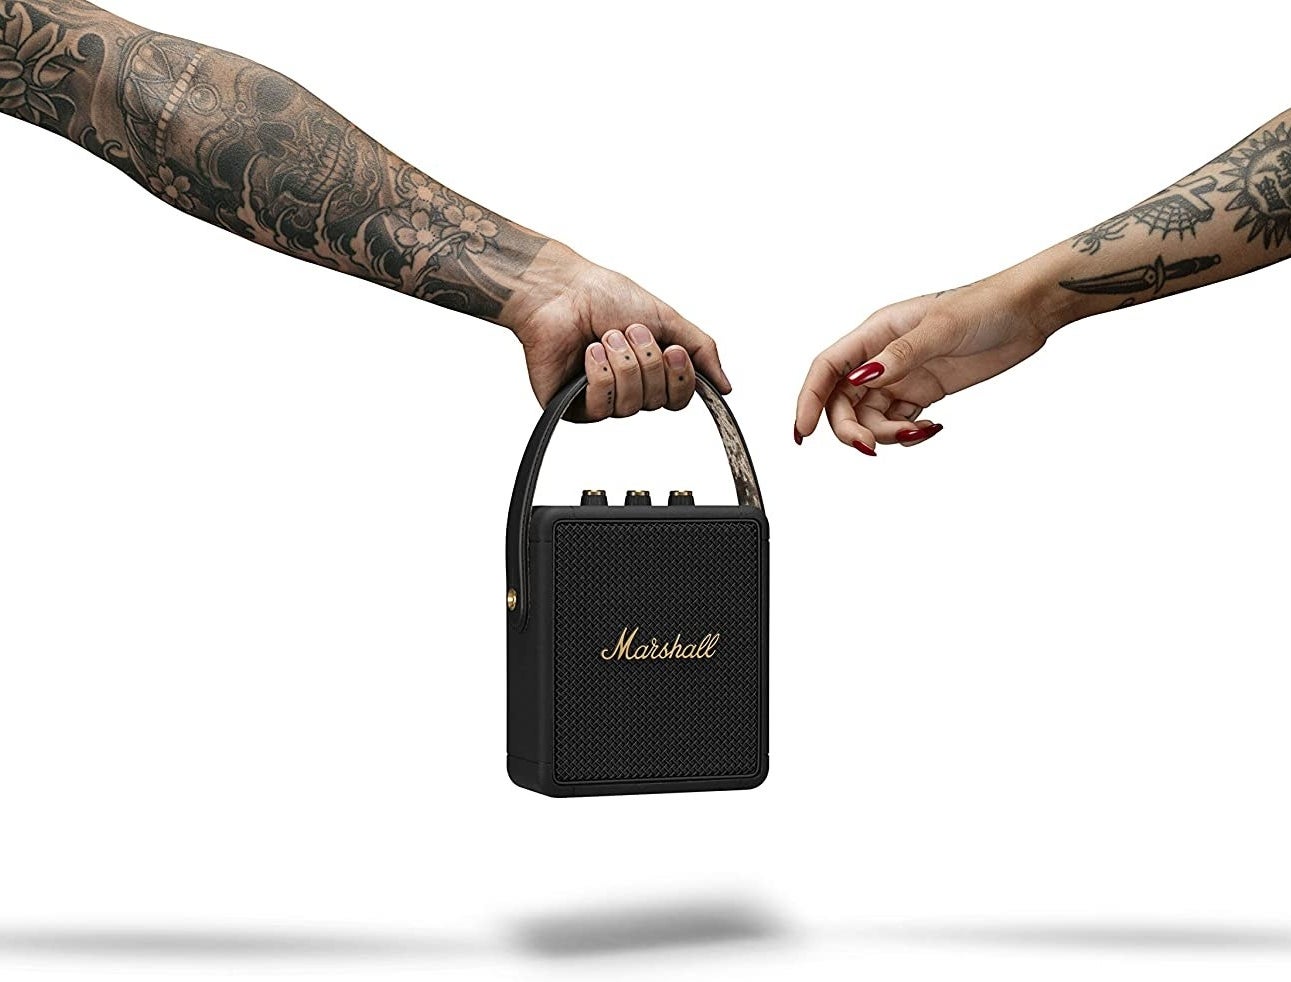 someone handing a person the bluetooth speaker by its top handle